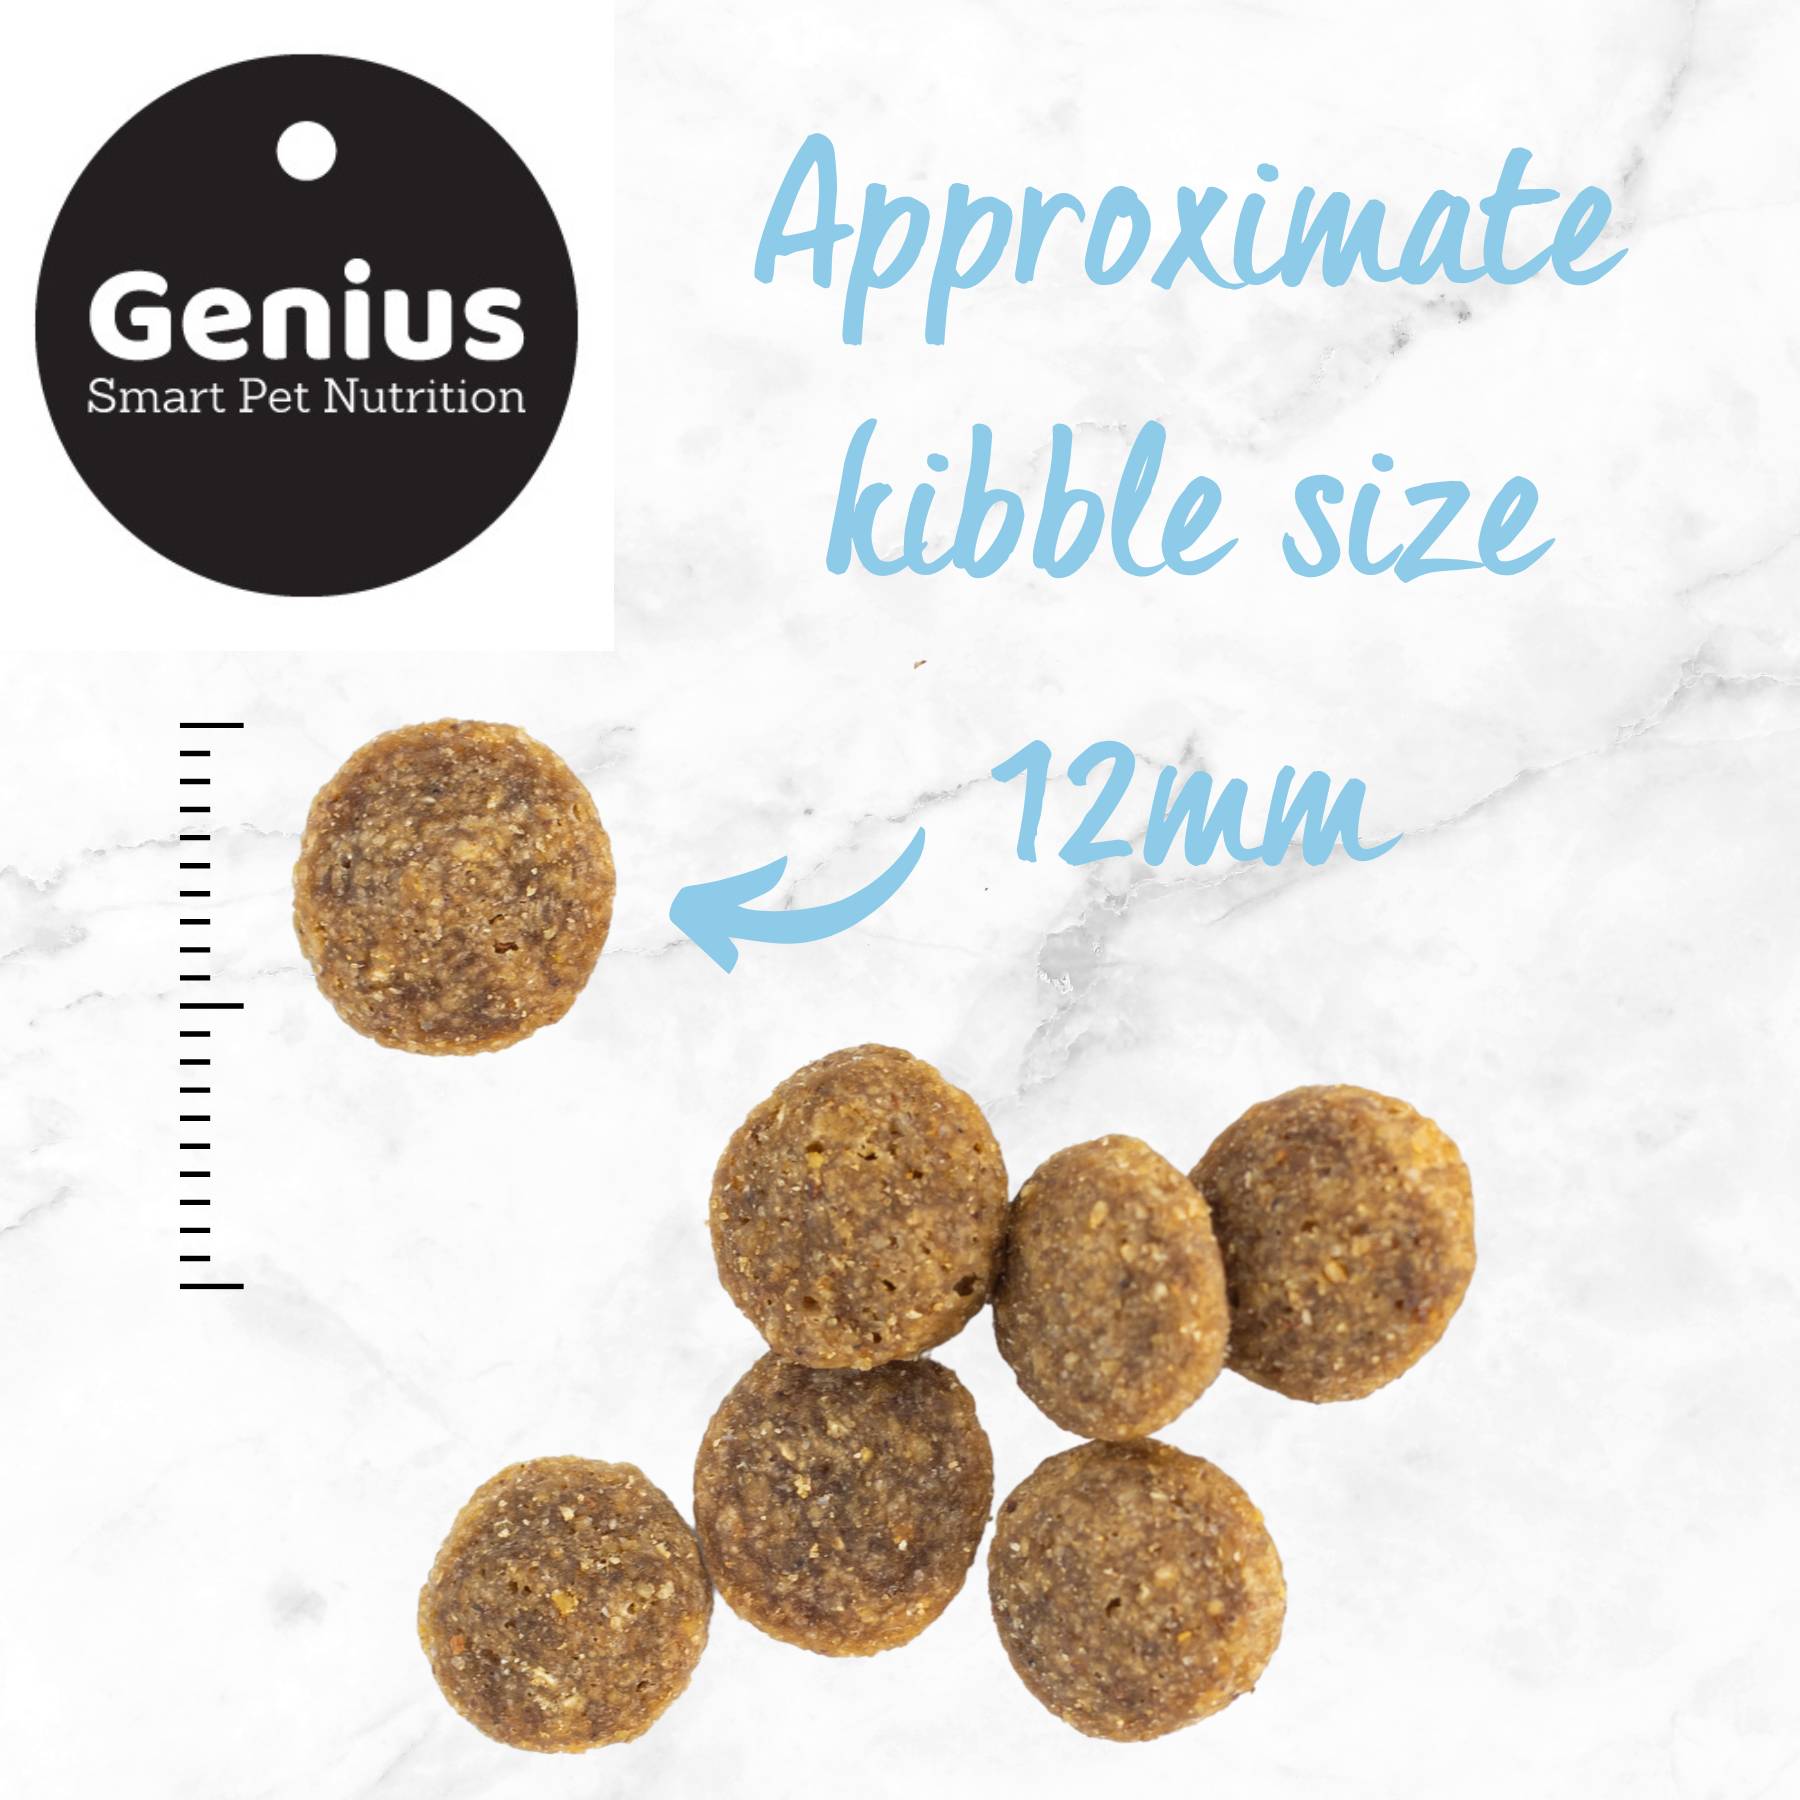 Image showing the approximate size of the kibble in a sample bag of Genius Ocean Fish dog food